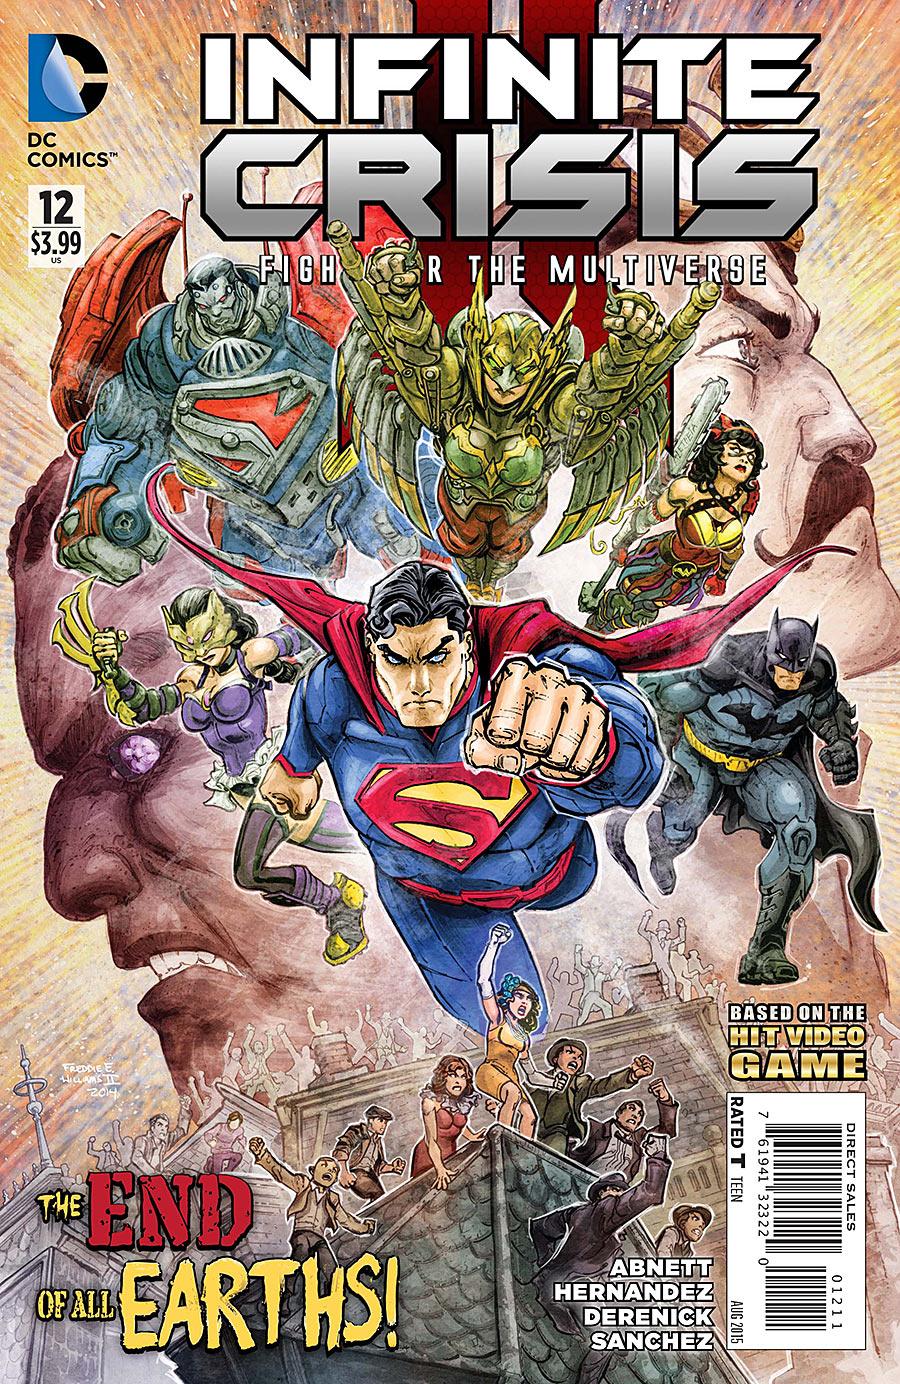 Infinite Crisis: The Fight for the Multiverse Vol. 1 #12